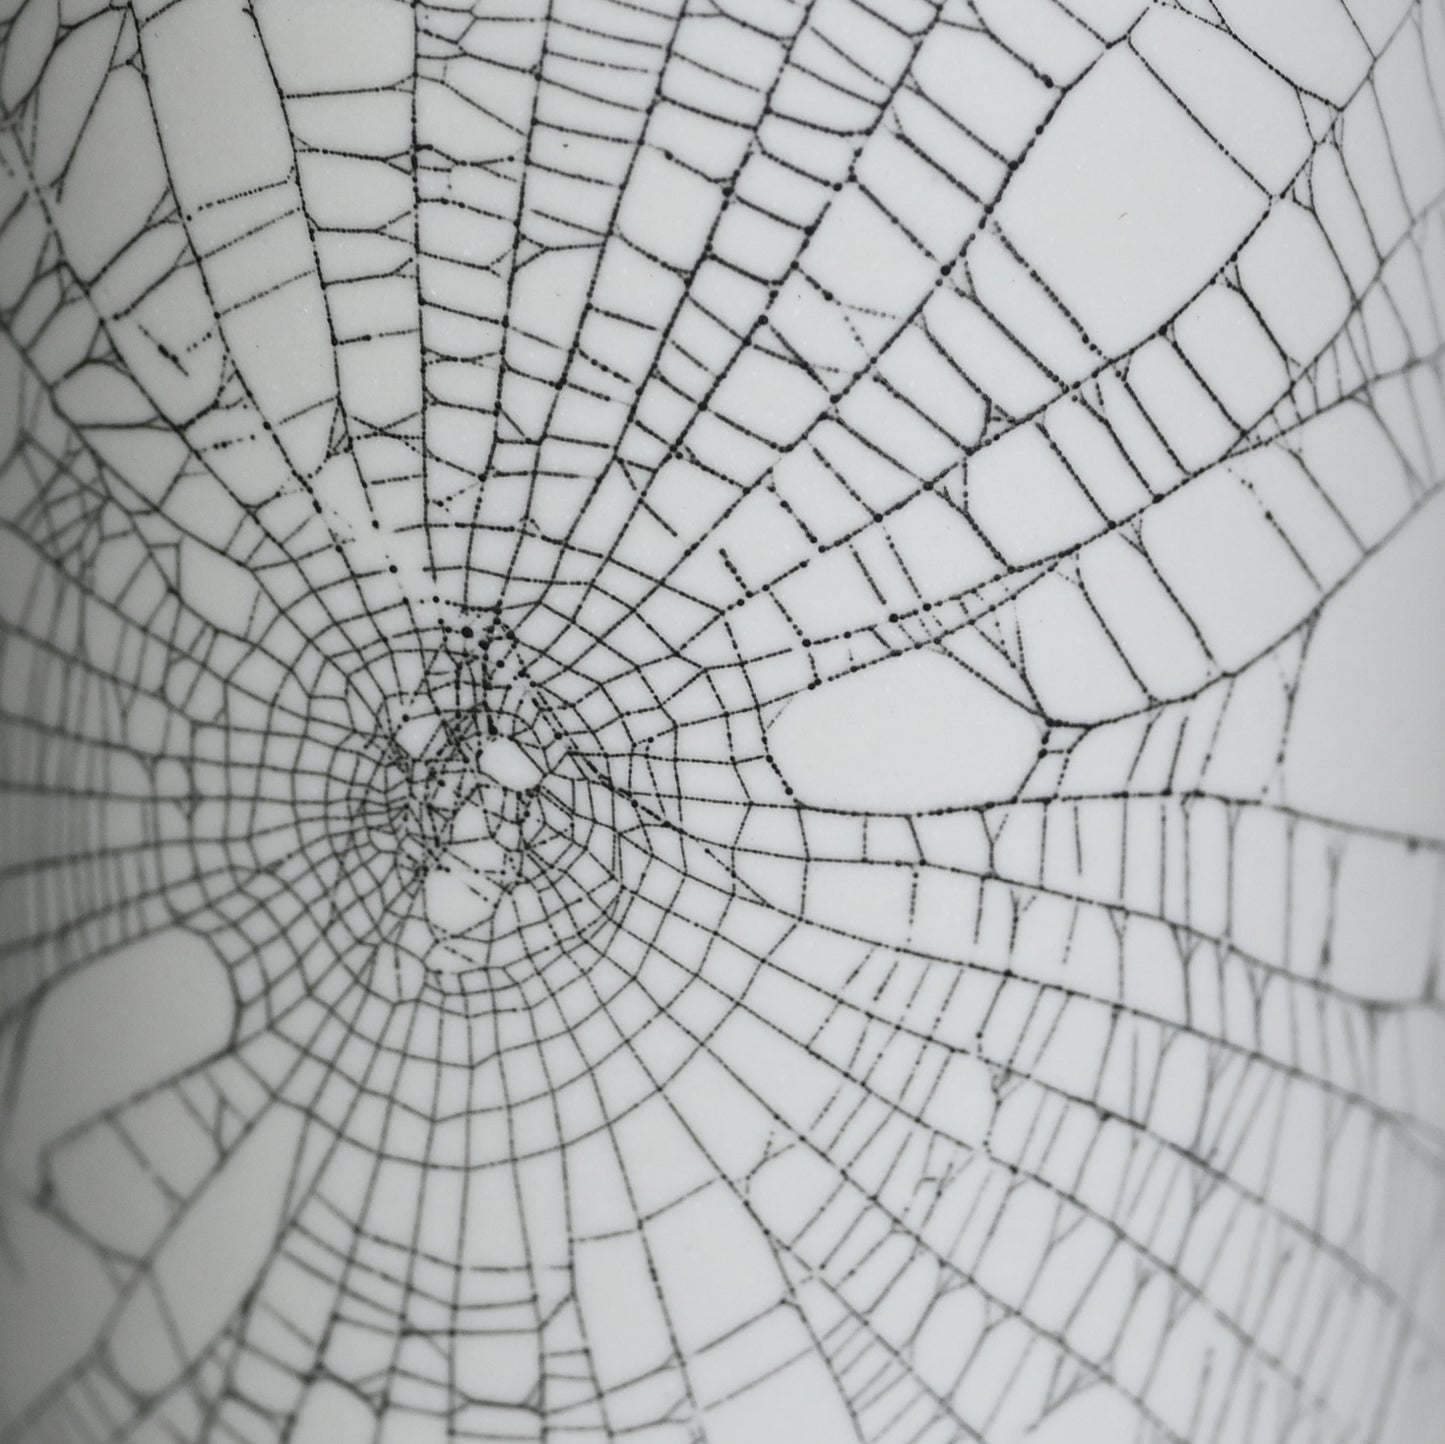 Web on Clay (167), Collected September 17, 2022